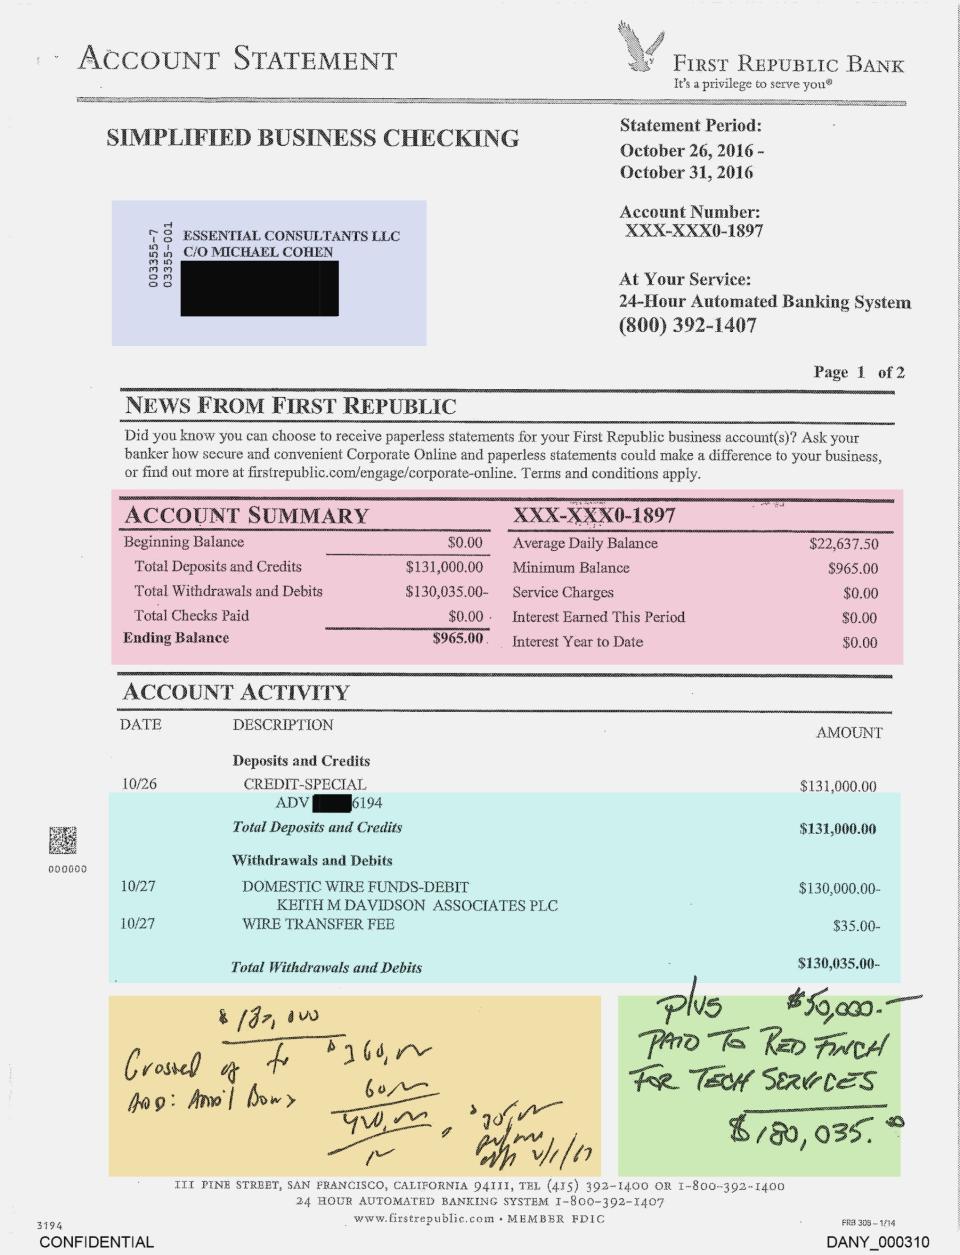 A bank account statement with Michael Cohen's name on it and various sections highlighted in different colors.